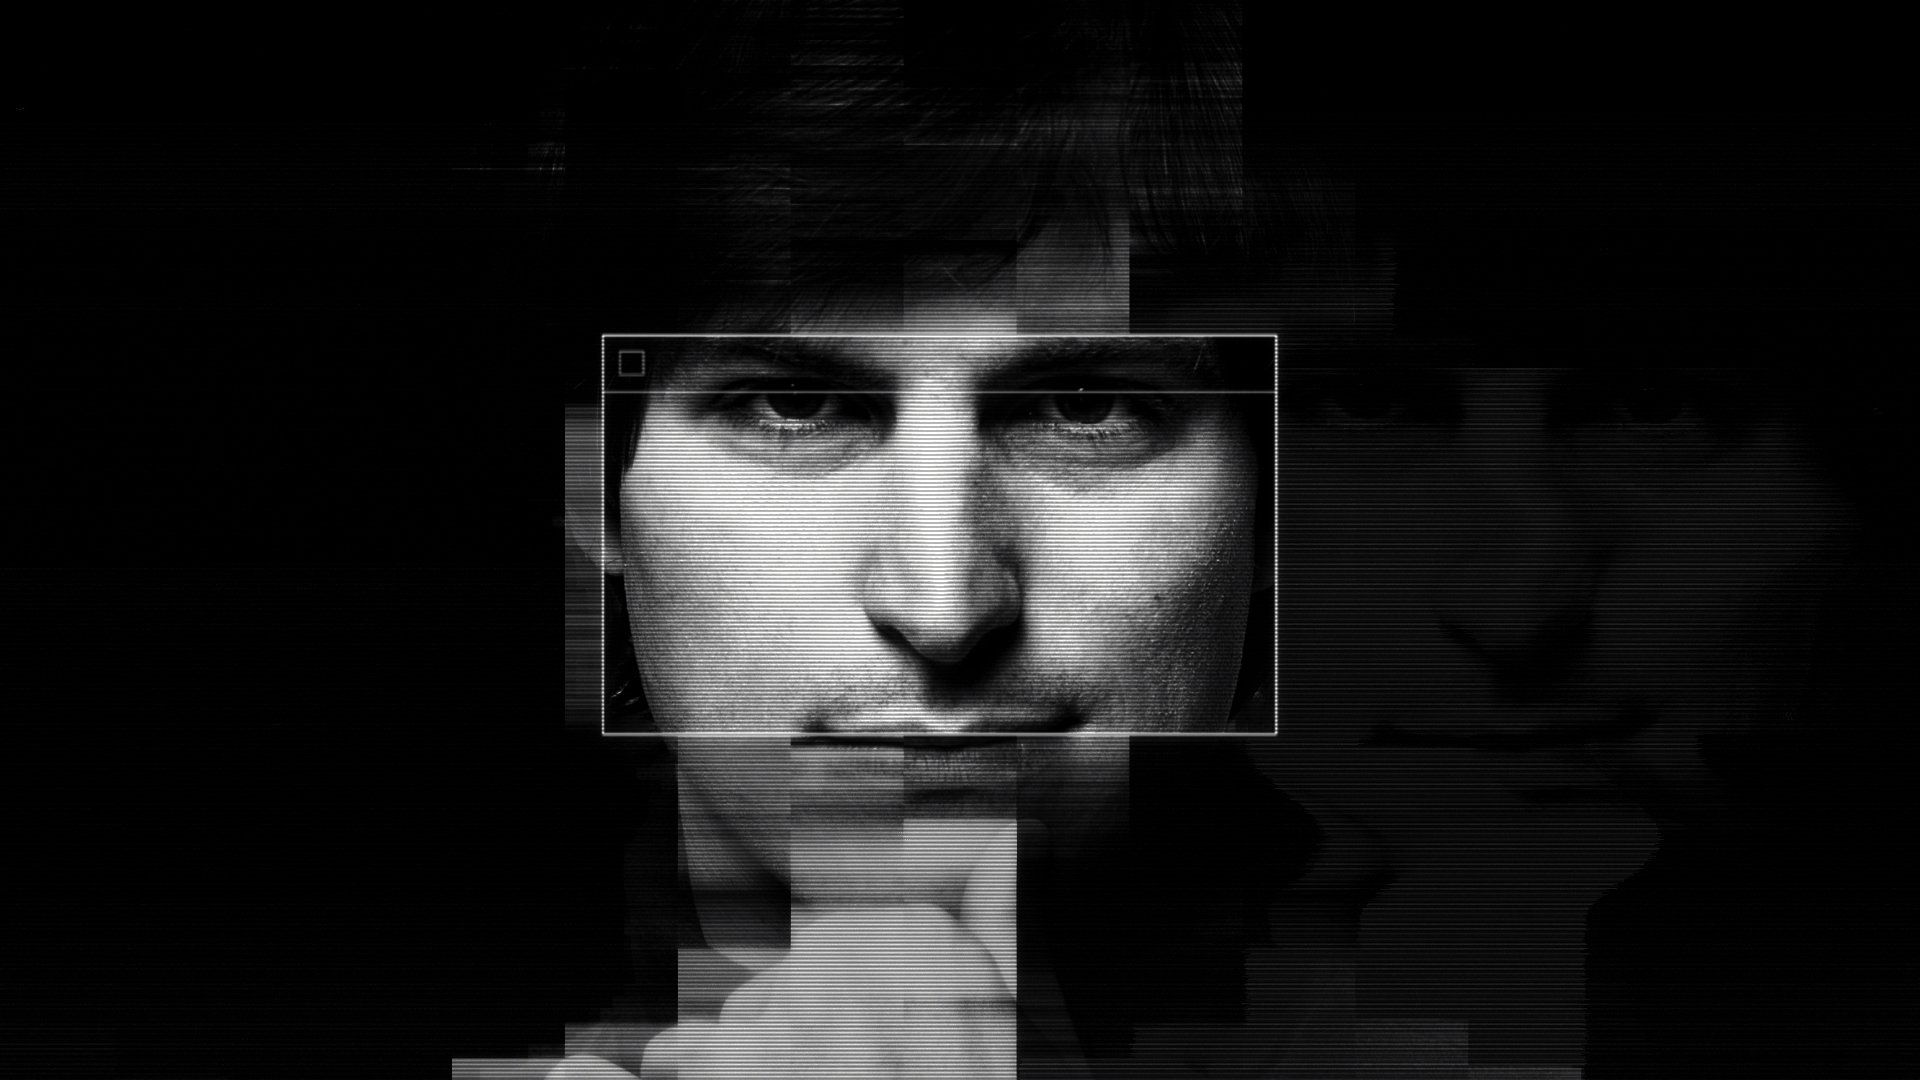 Steve Jobs: The Man in the Machine background